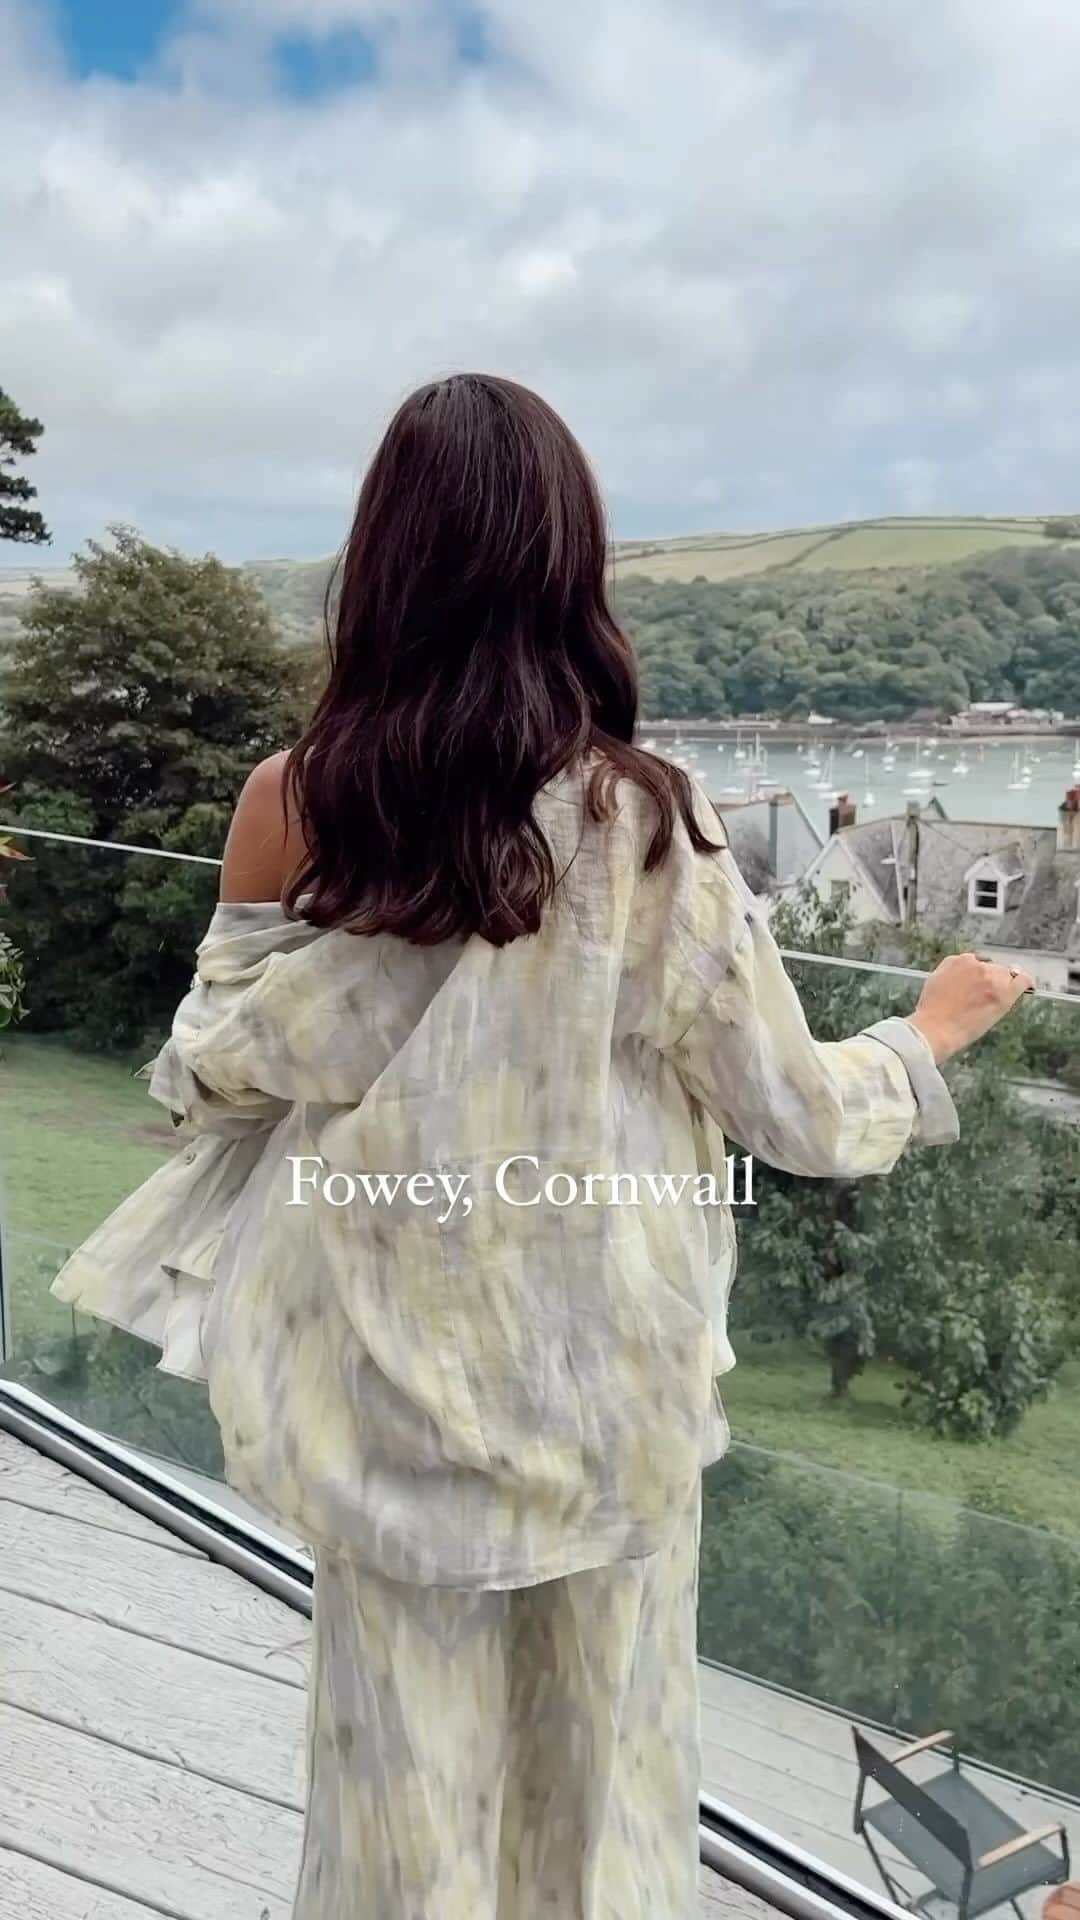 ルーシー・メックレンバーグのインスタグラム：「Making memories in Fowey, Cornwall 🥰🏖🐚  I’m so sad it’s taken me 31 years to visit Cornwall!  We decided to fly as I was a little anxious about the drive and it was such a great decision. The flight was 1 hour & it got Roman so excited for his holiday ✈️ We stayed at @foweyhall which was a 35min taxi from Newquay airport.   The hotel is a 5min walk to Fowey town which is beautiful. Full of Independent bakeries, boutiques & restaurants.   We were a 10min walk to Ready money beach. Which is an idyllic little beach cove with a small shop that sells all your beach day essentials. ice cream, buckets & spades, drinks & Cornish pasties of course! 🪣🍦  On the second day we got a 15min taxi to the Eden project which was such a lovely day out. You can definitely stay a full day there. There’s also an Incredible zip line for any adrenaline junkies!  Our hotel @foweyhall is part of the @luxuryfamilyhotels so was ideal for families.  The kids went to ‘The Den’ crèche each morning at 10-11.30am meaning me and Ryan got to have a lovely long coastal walk, coffee, a mooch around the shops or a massage at the hotels newly renovated spa.  Everyday the hotel had a full itinerary of activities available for kids to get involved in, There was 2 games rooms, a cinema room and books & toys all around the hotel. Roman & Lilah’s favourite though was probably the hotels 2 adorable bunnies 🐰  We had the best time and will 100% be returning next year 👏  Im happy to answer any questions you have in the comments below.⬇️」